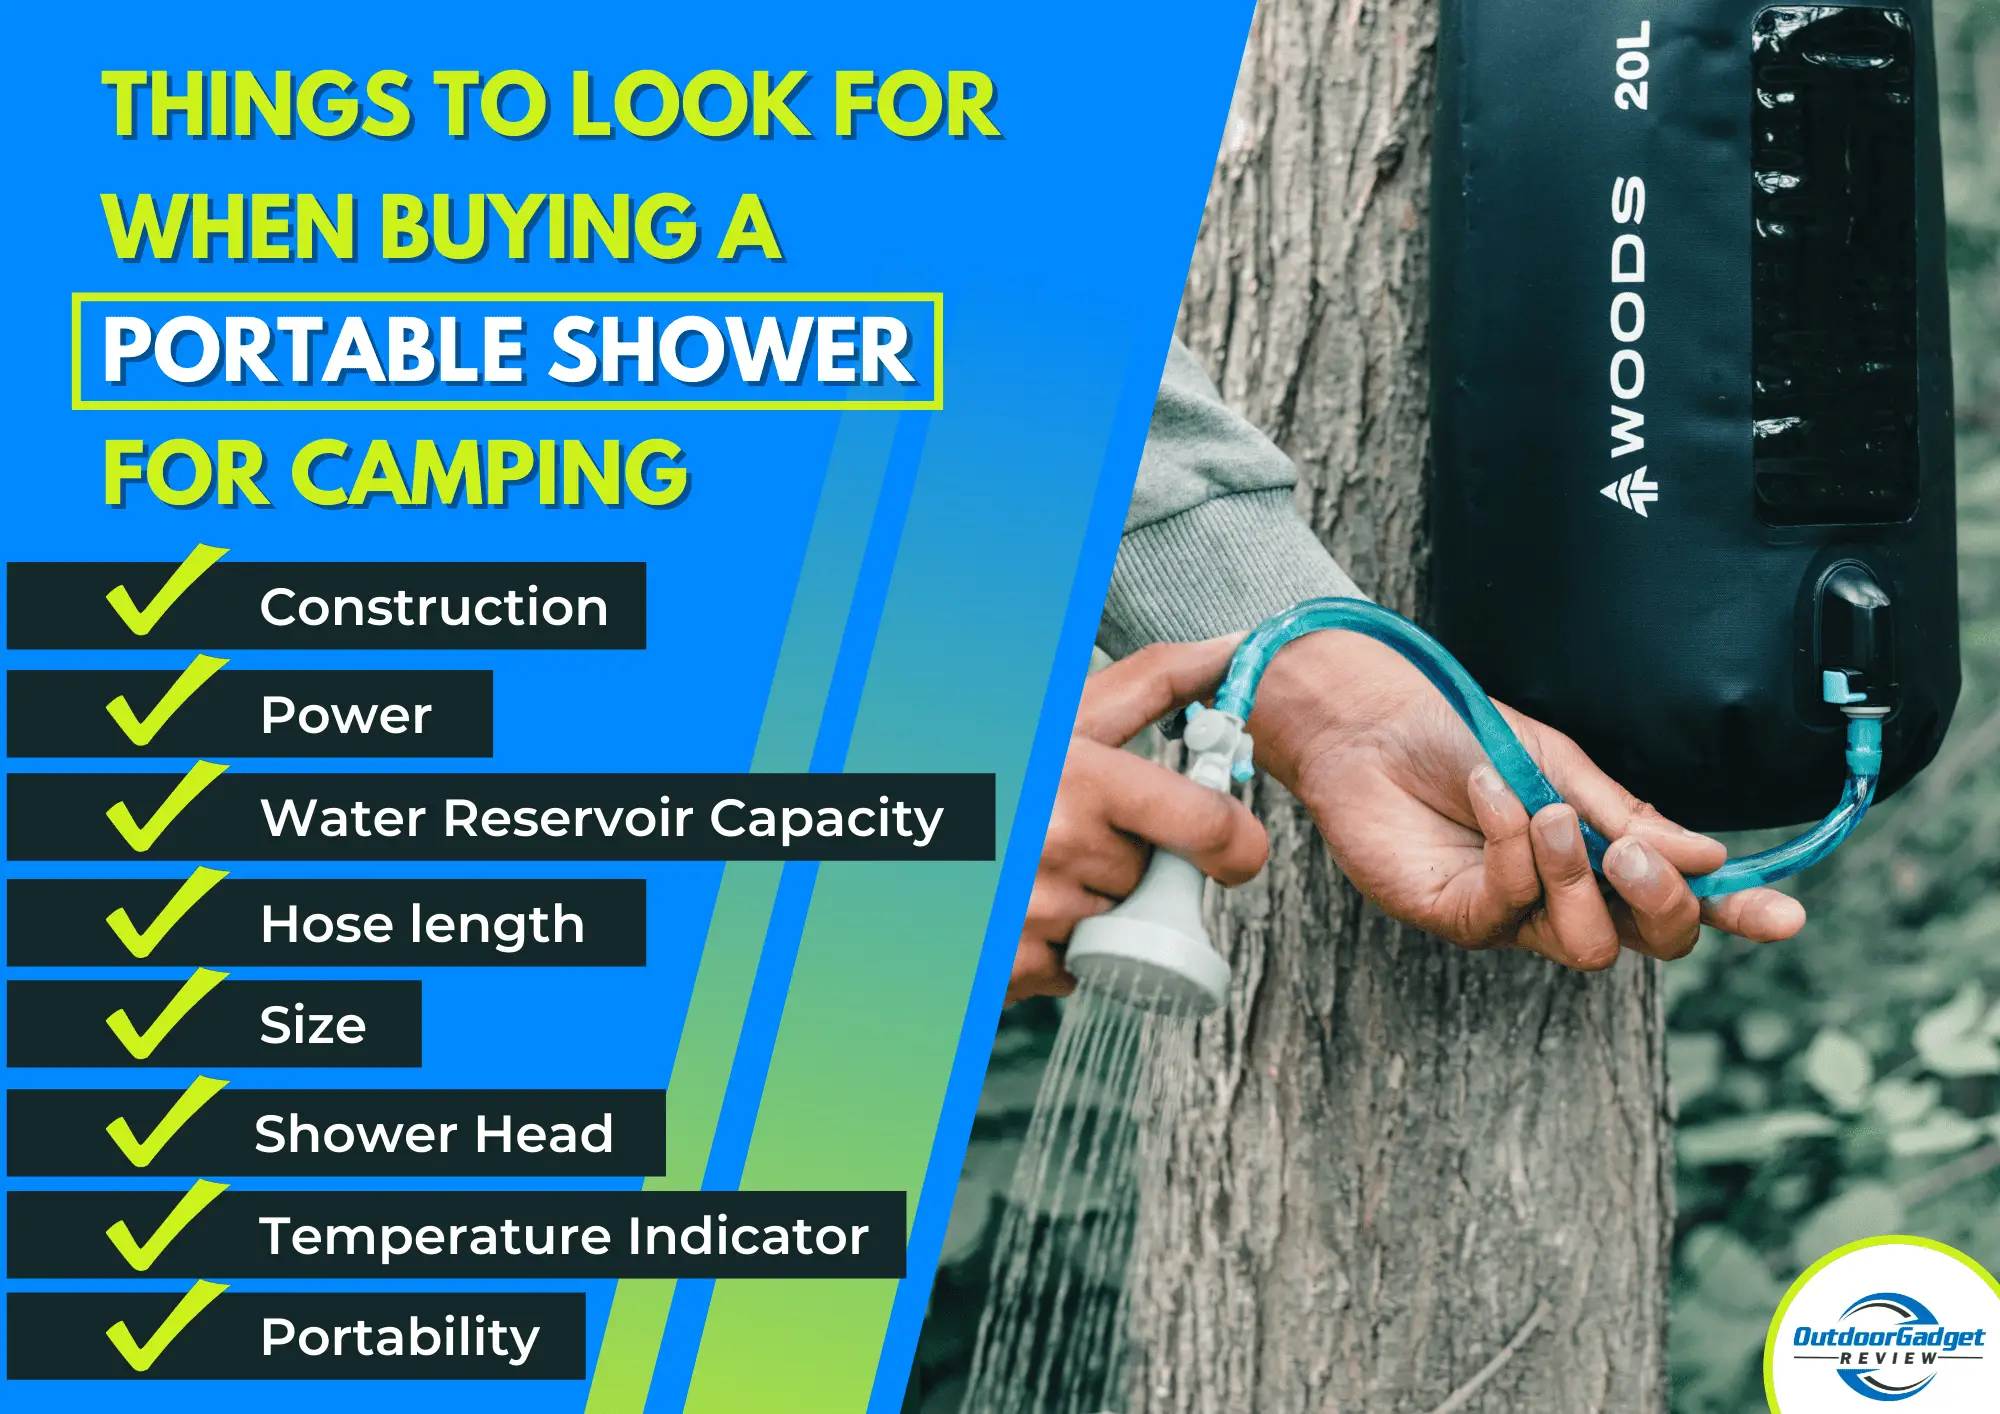 Things to Look for When Buying a Portable Shower for Camping